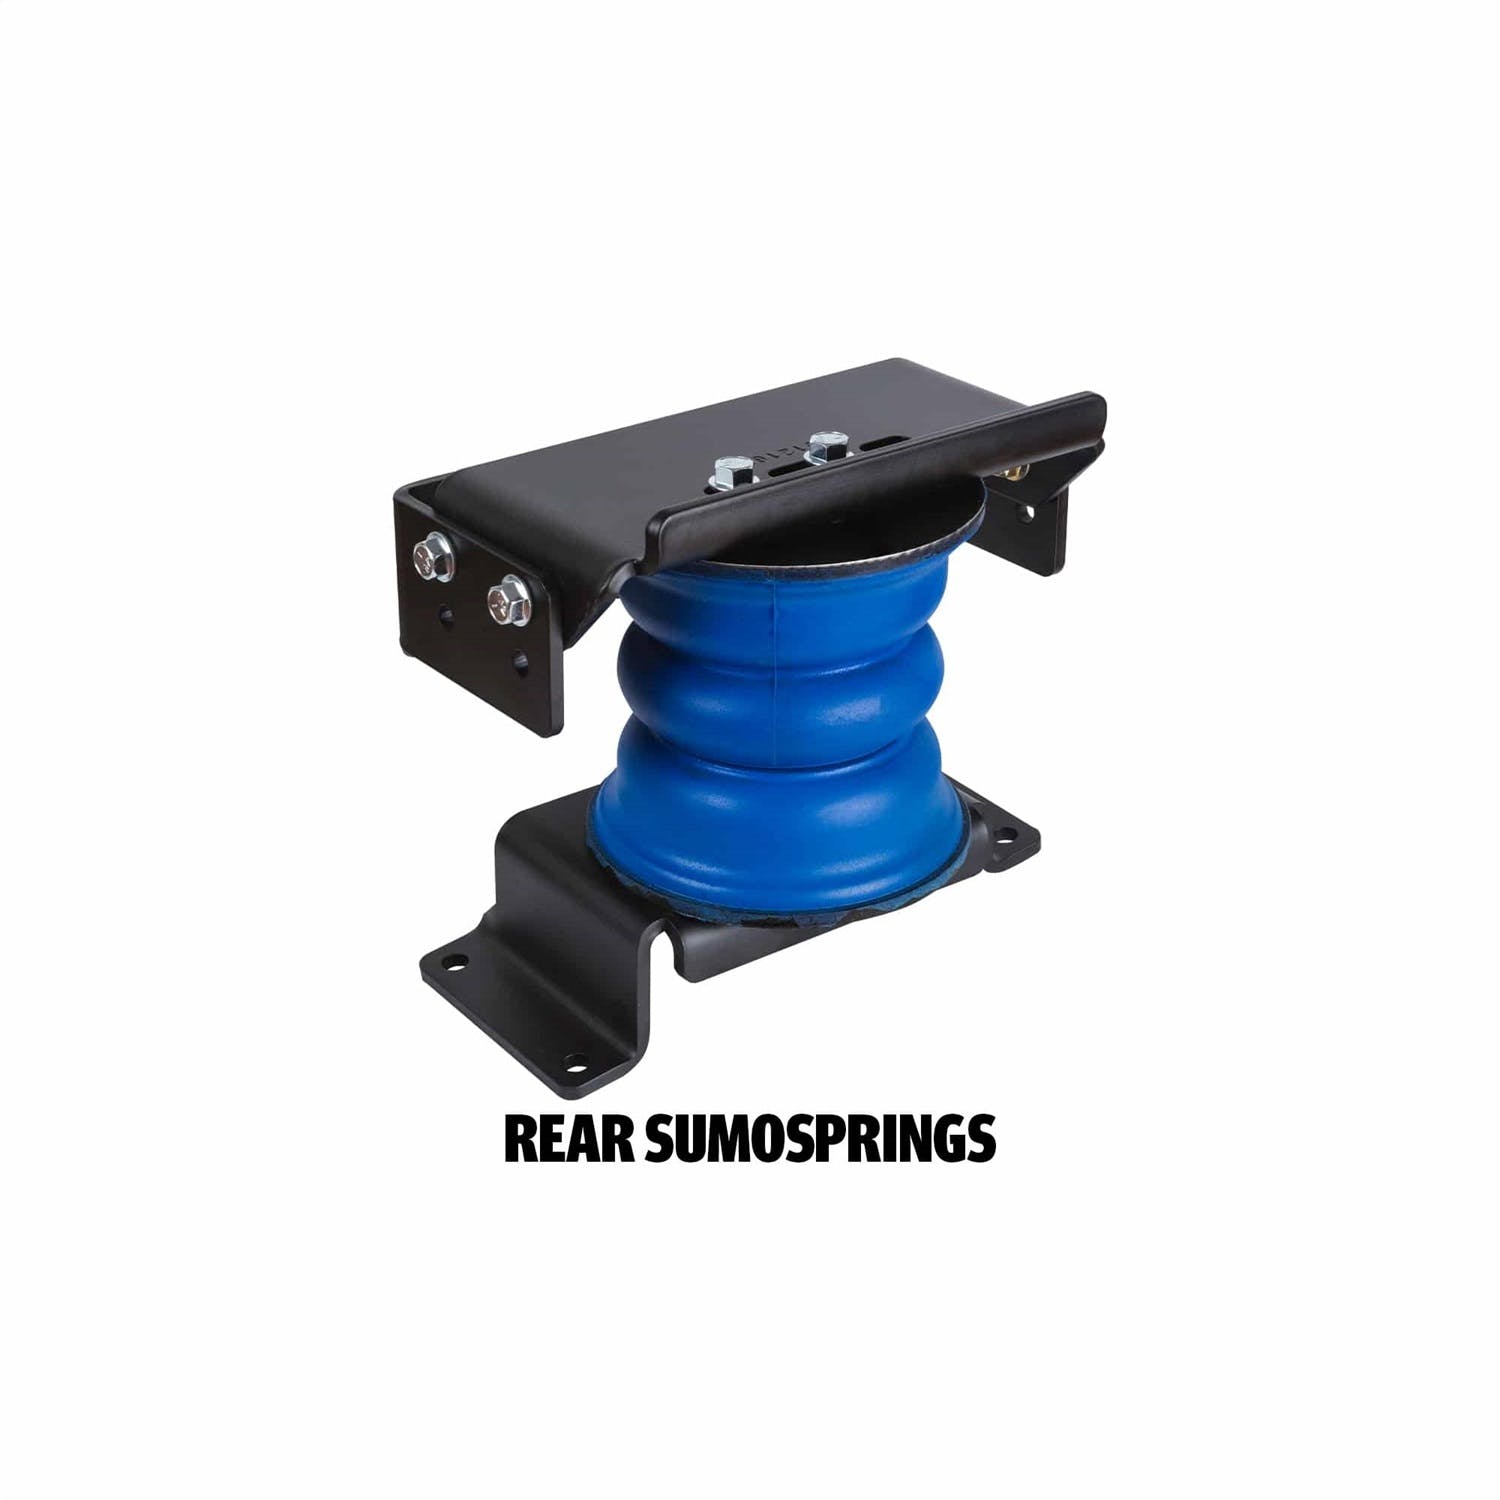 SuperSprings K-10-011 SumoSprings Front and Rear Kits are one-piece units attached on each side